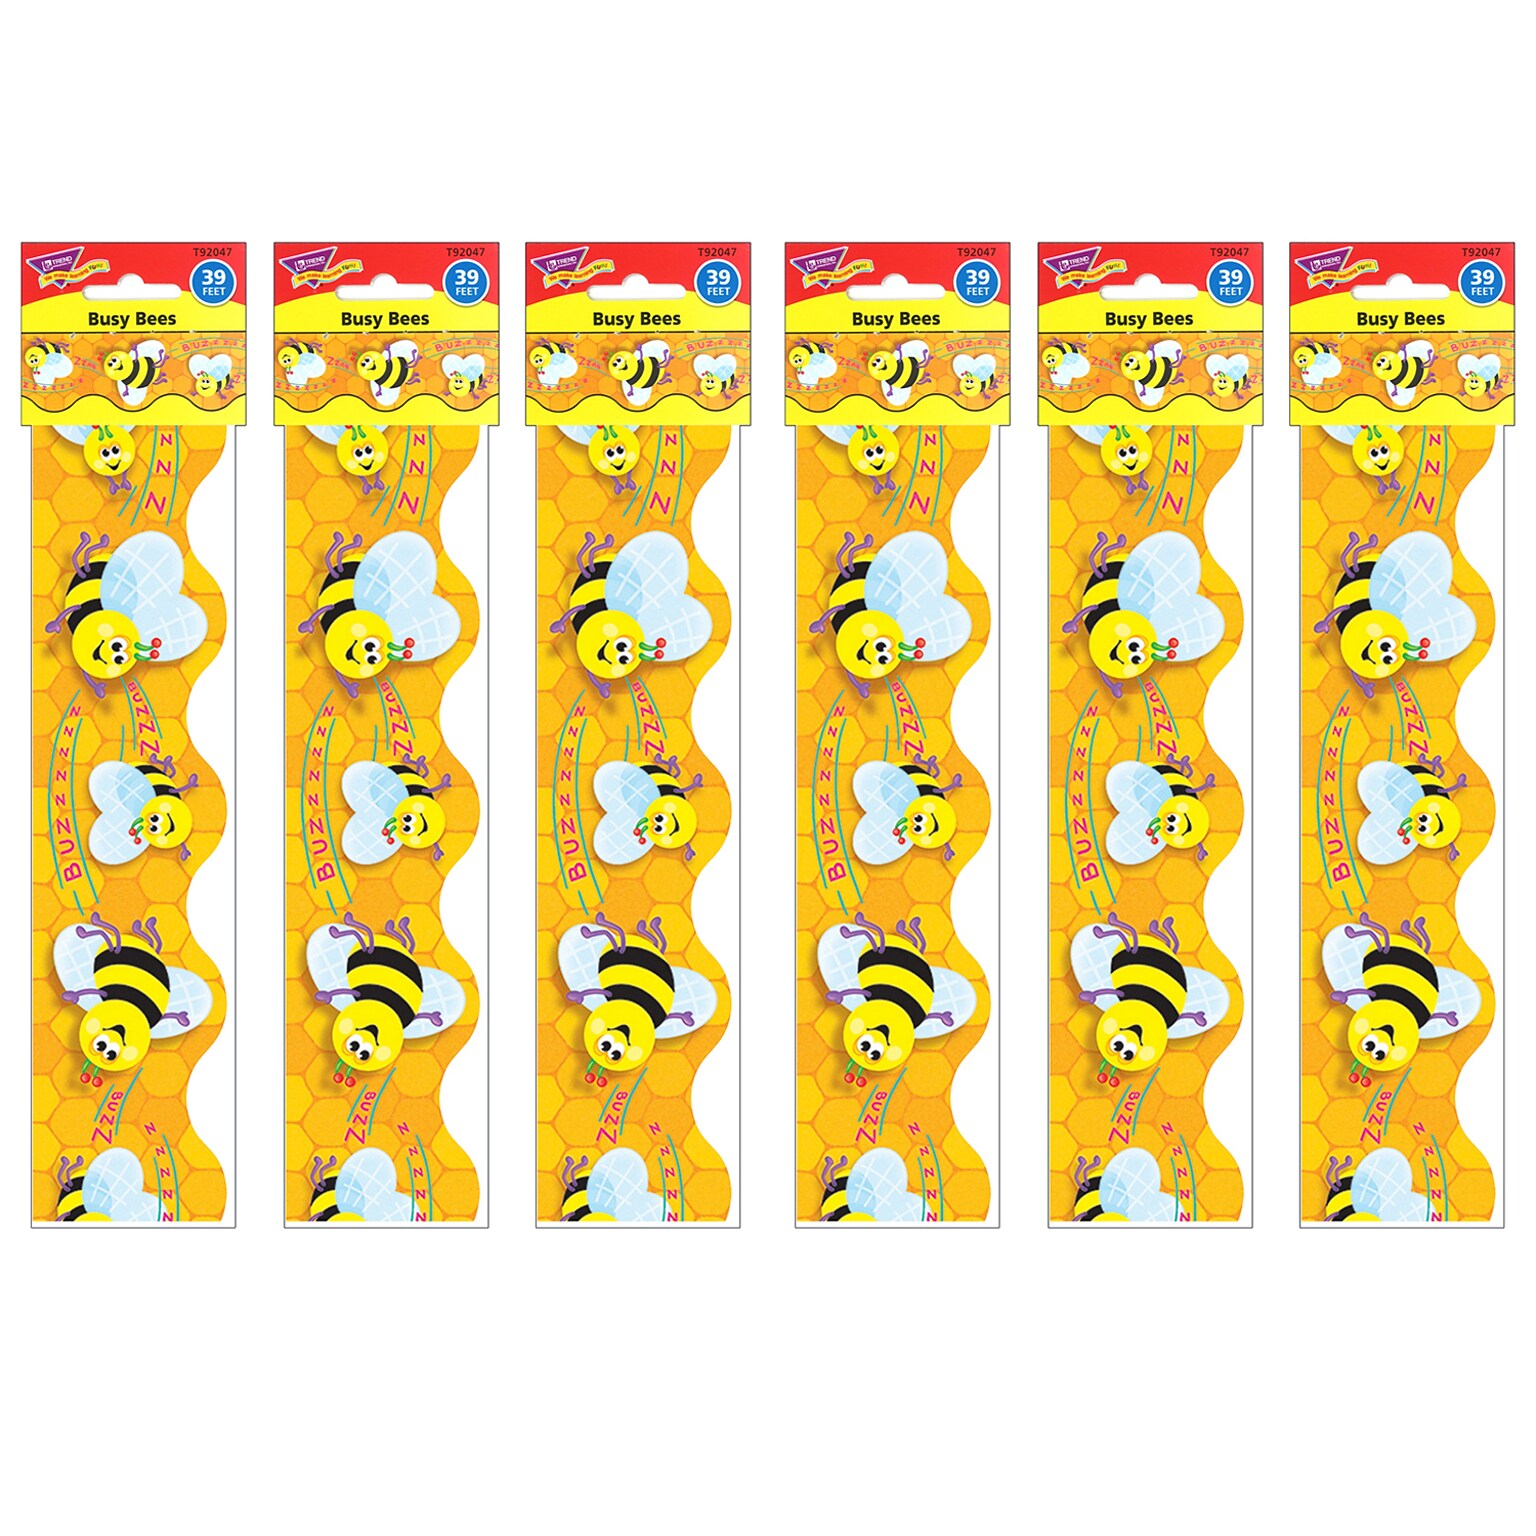 TREND Busy Bees Terrific Trimmers, 39 Feet Per Pack, 6 Packs (T-92047-6)